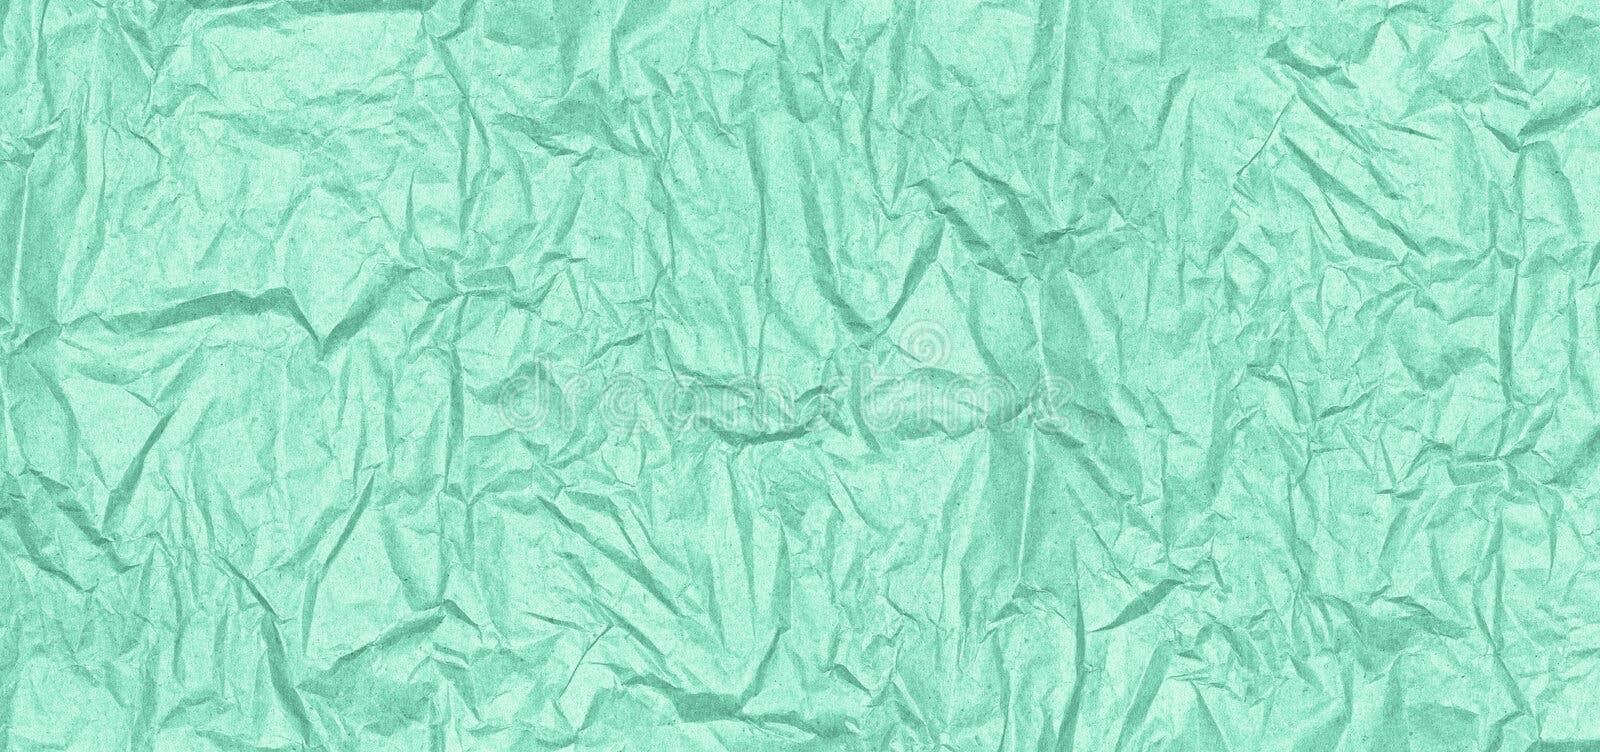 https://thumbs.dreamstime.com/b/mint-green-crumpled-paper-texture-wrinkle-pattern-pastel-color-abstract-wide-background-235502028.jpg?w=1600